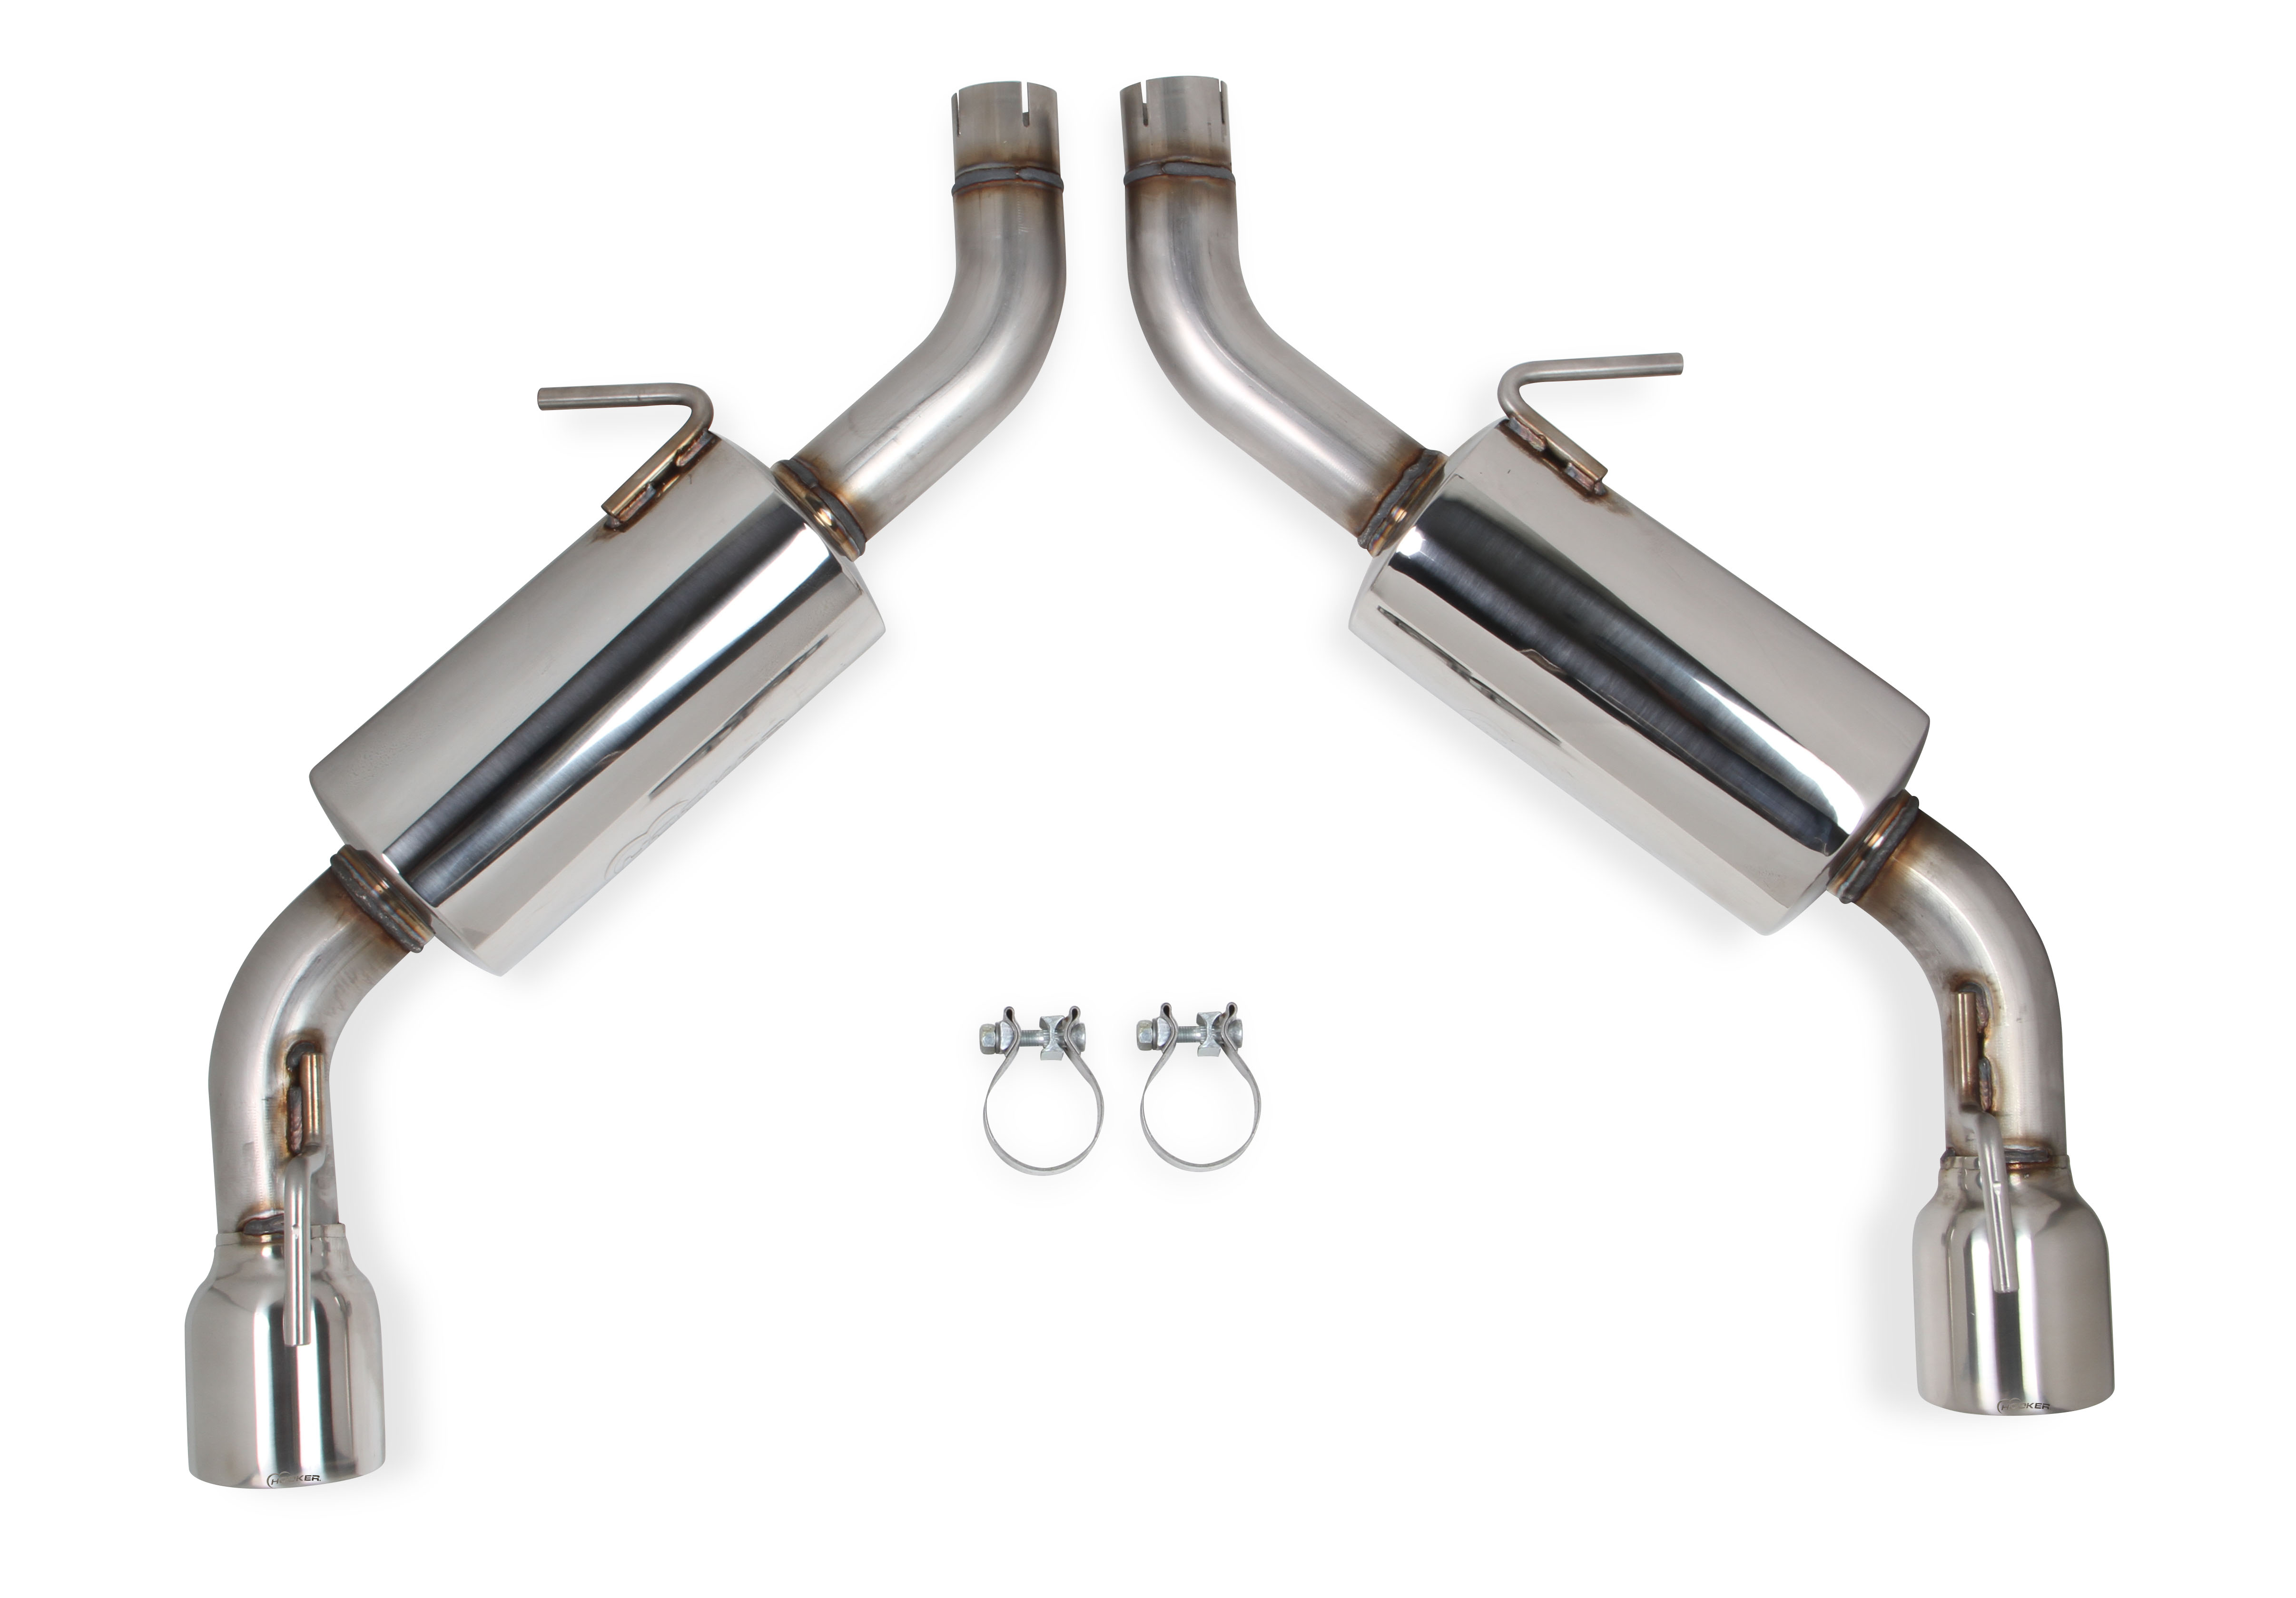 2016+ Camaro 3.6L V6 Hooker Headers 2.5" Stainless Steel Axle-Back Exhaust System w/Mufflers